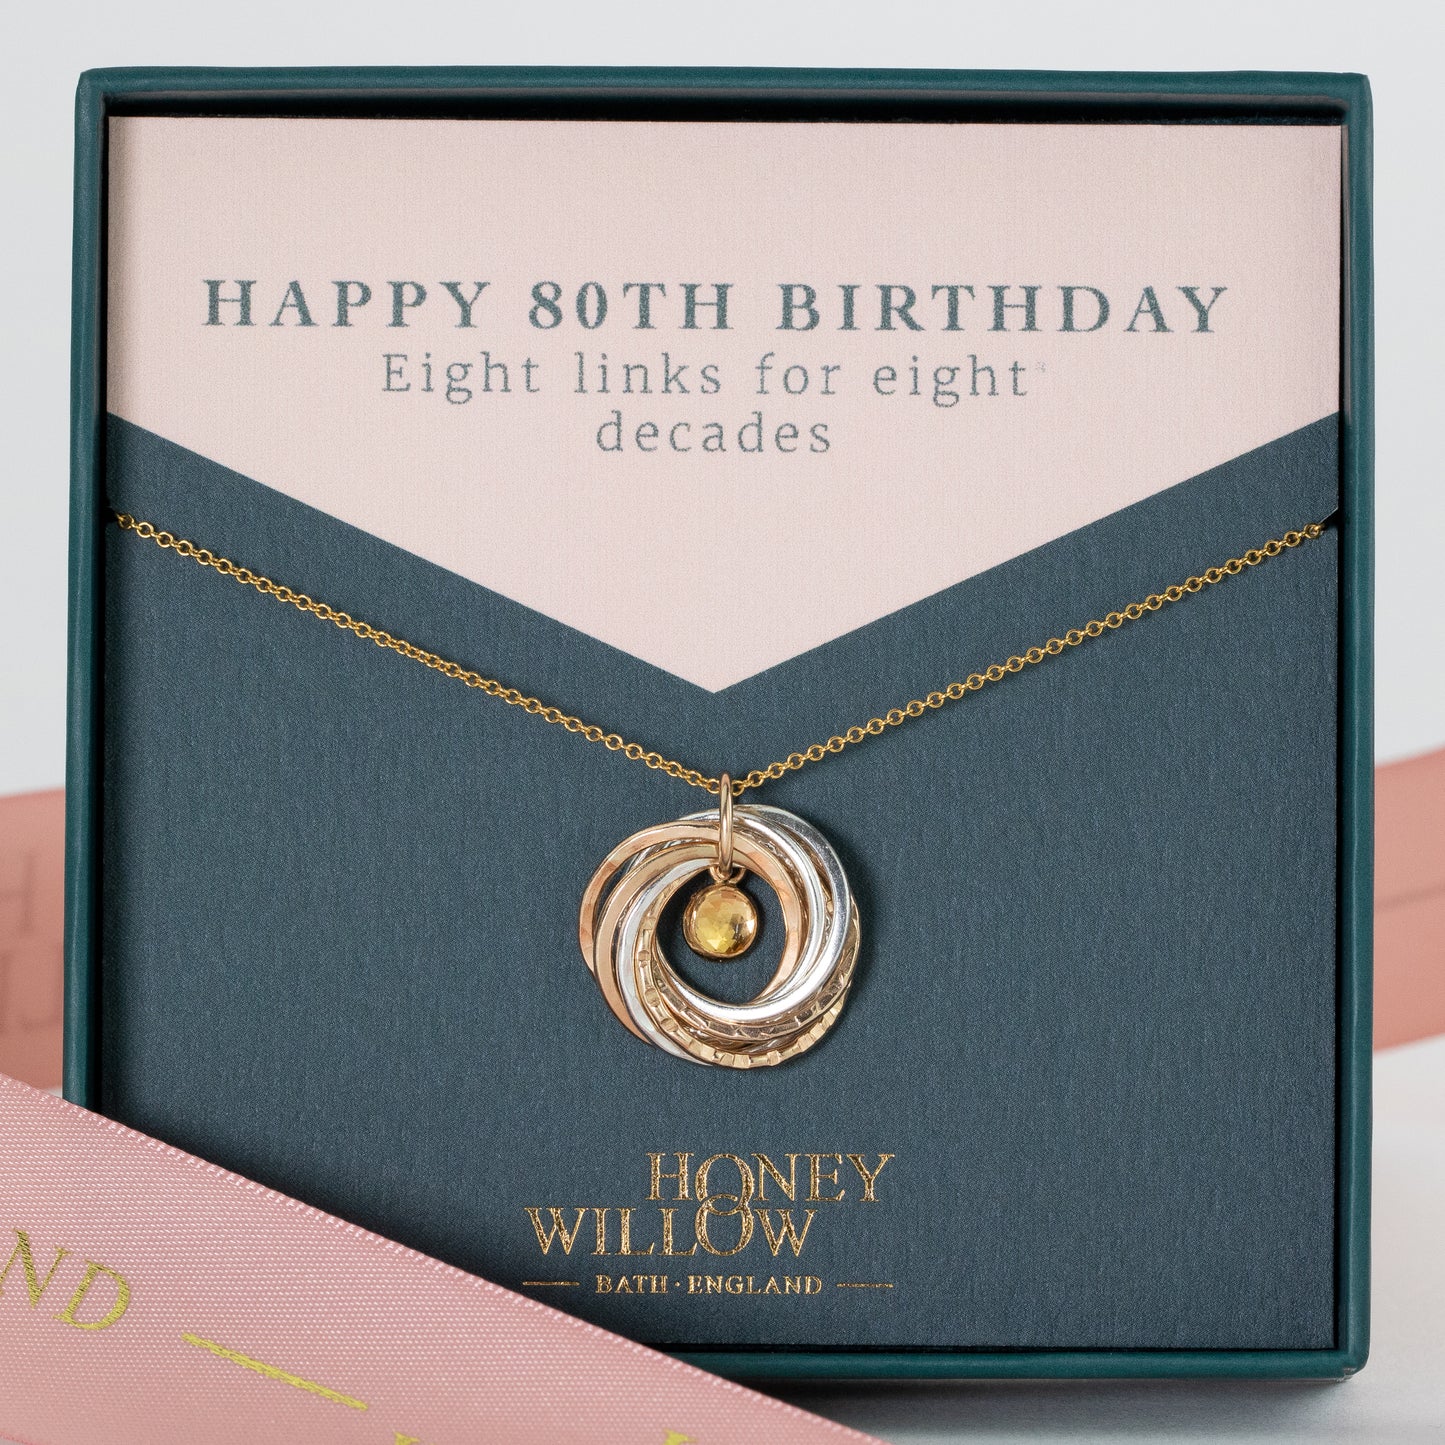 80th Birthday Birthstone Necklace - The Original 8 Links for 8 Decades Necklace - Petite Silver & Gold